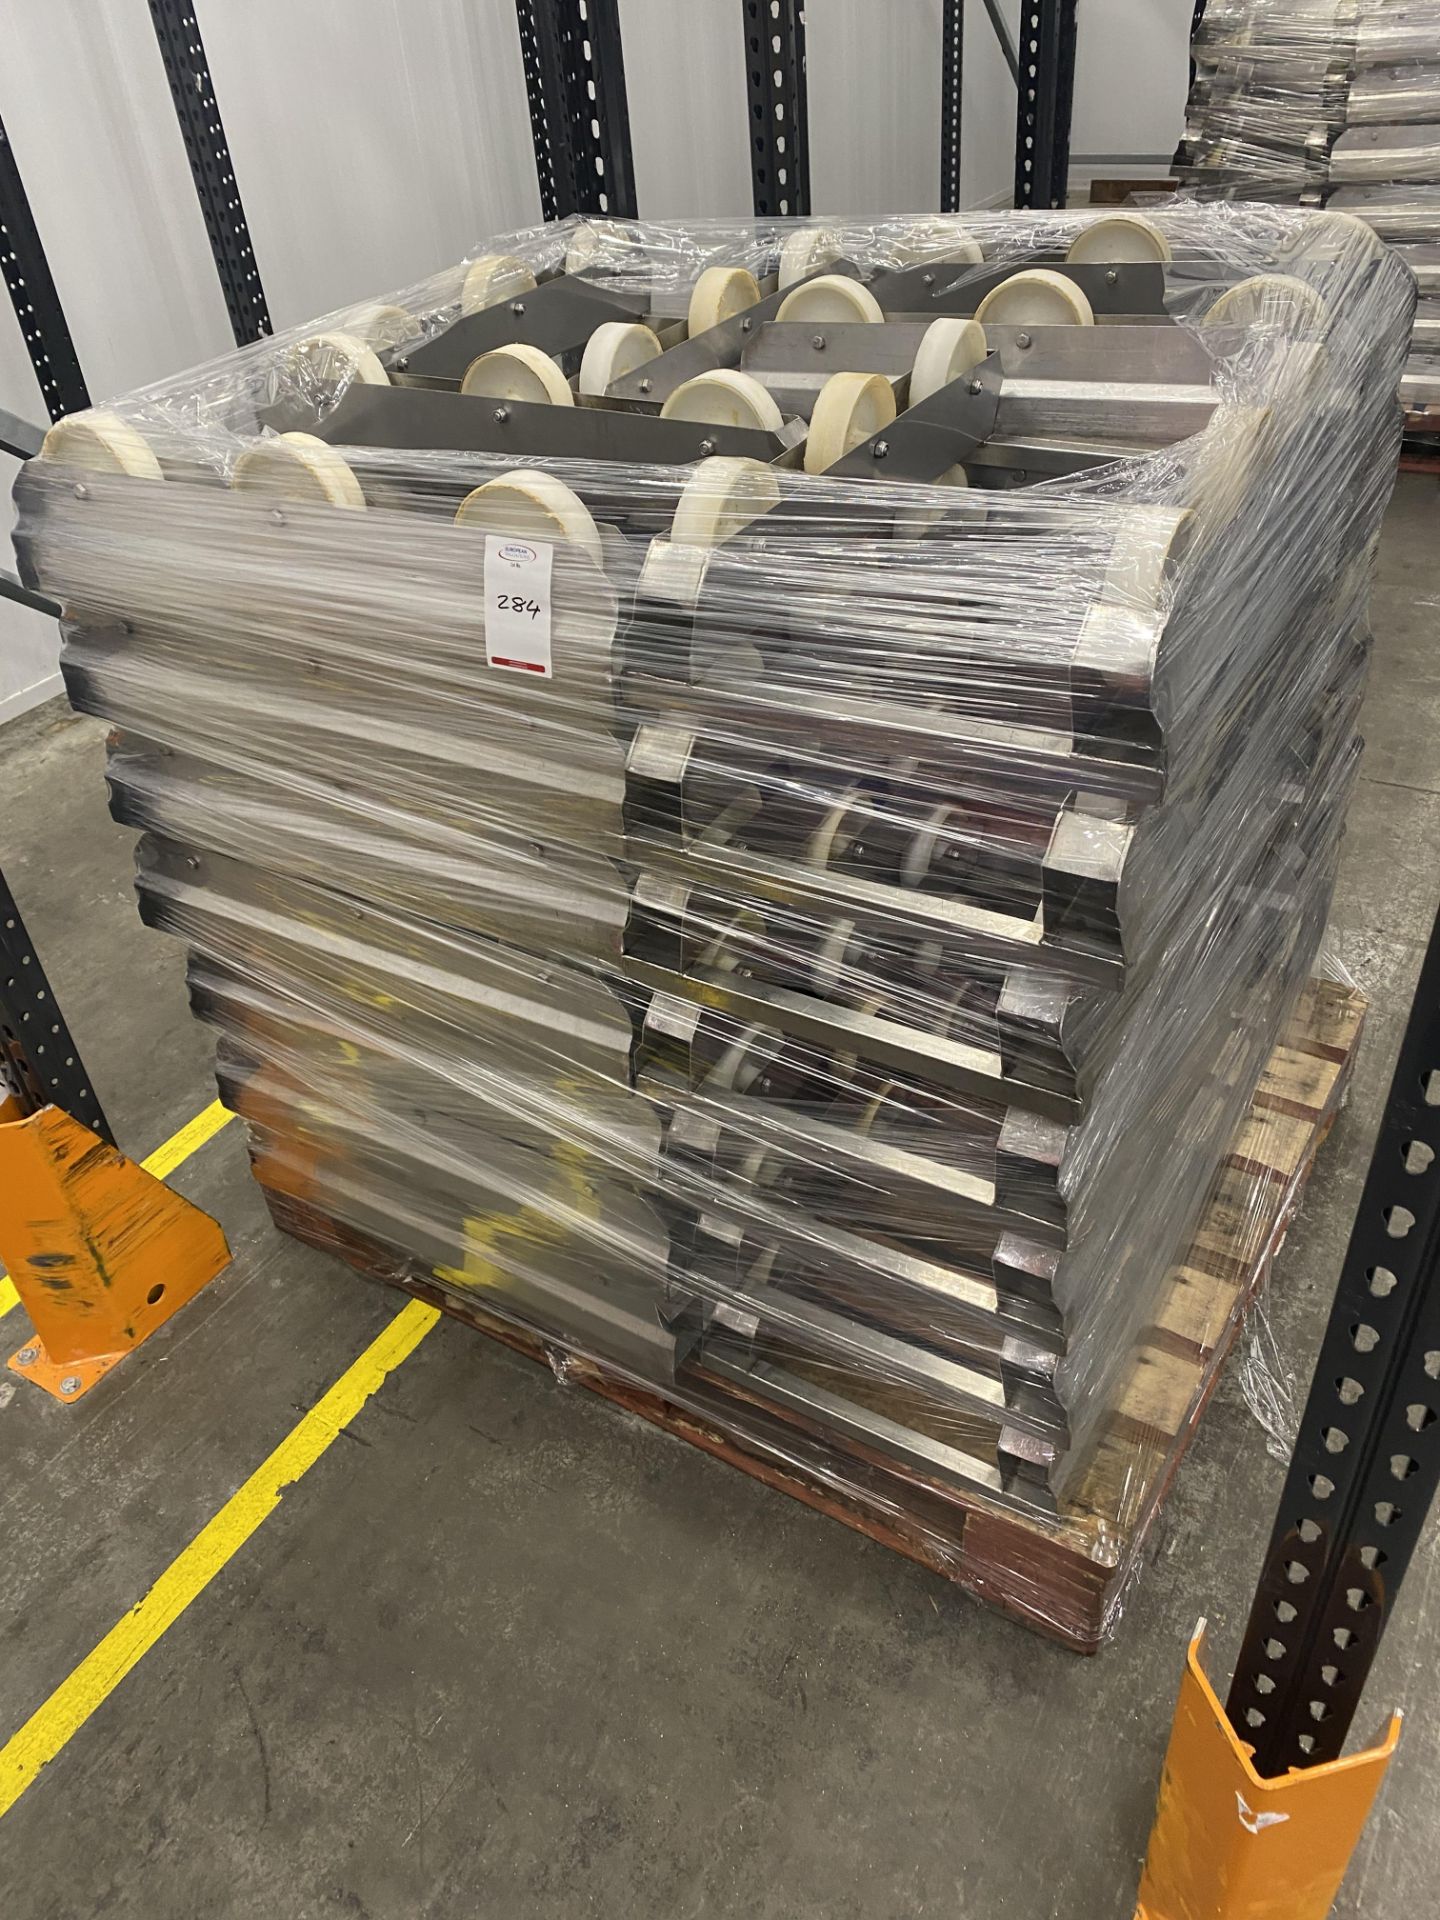 Pallet of stainless steel tray skids